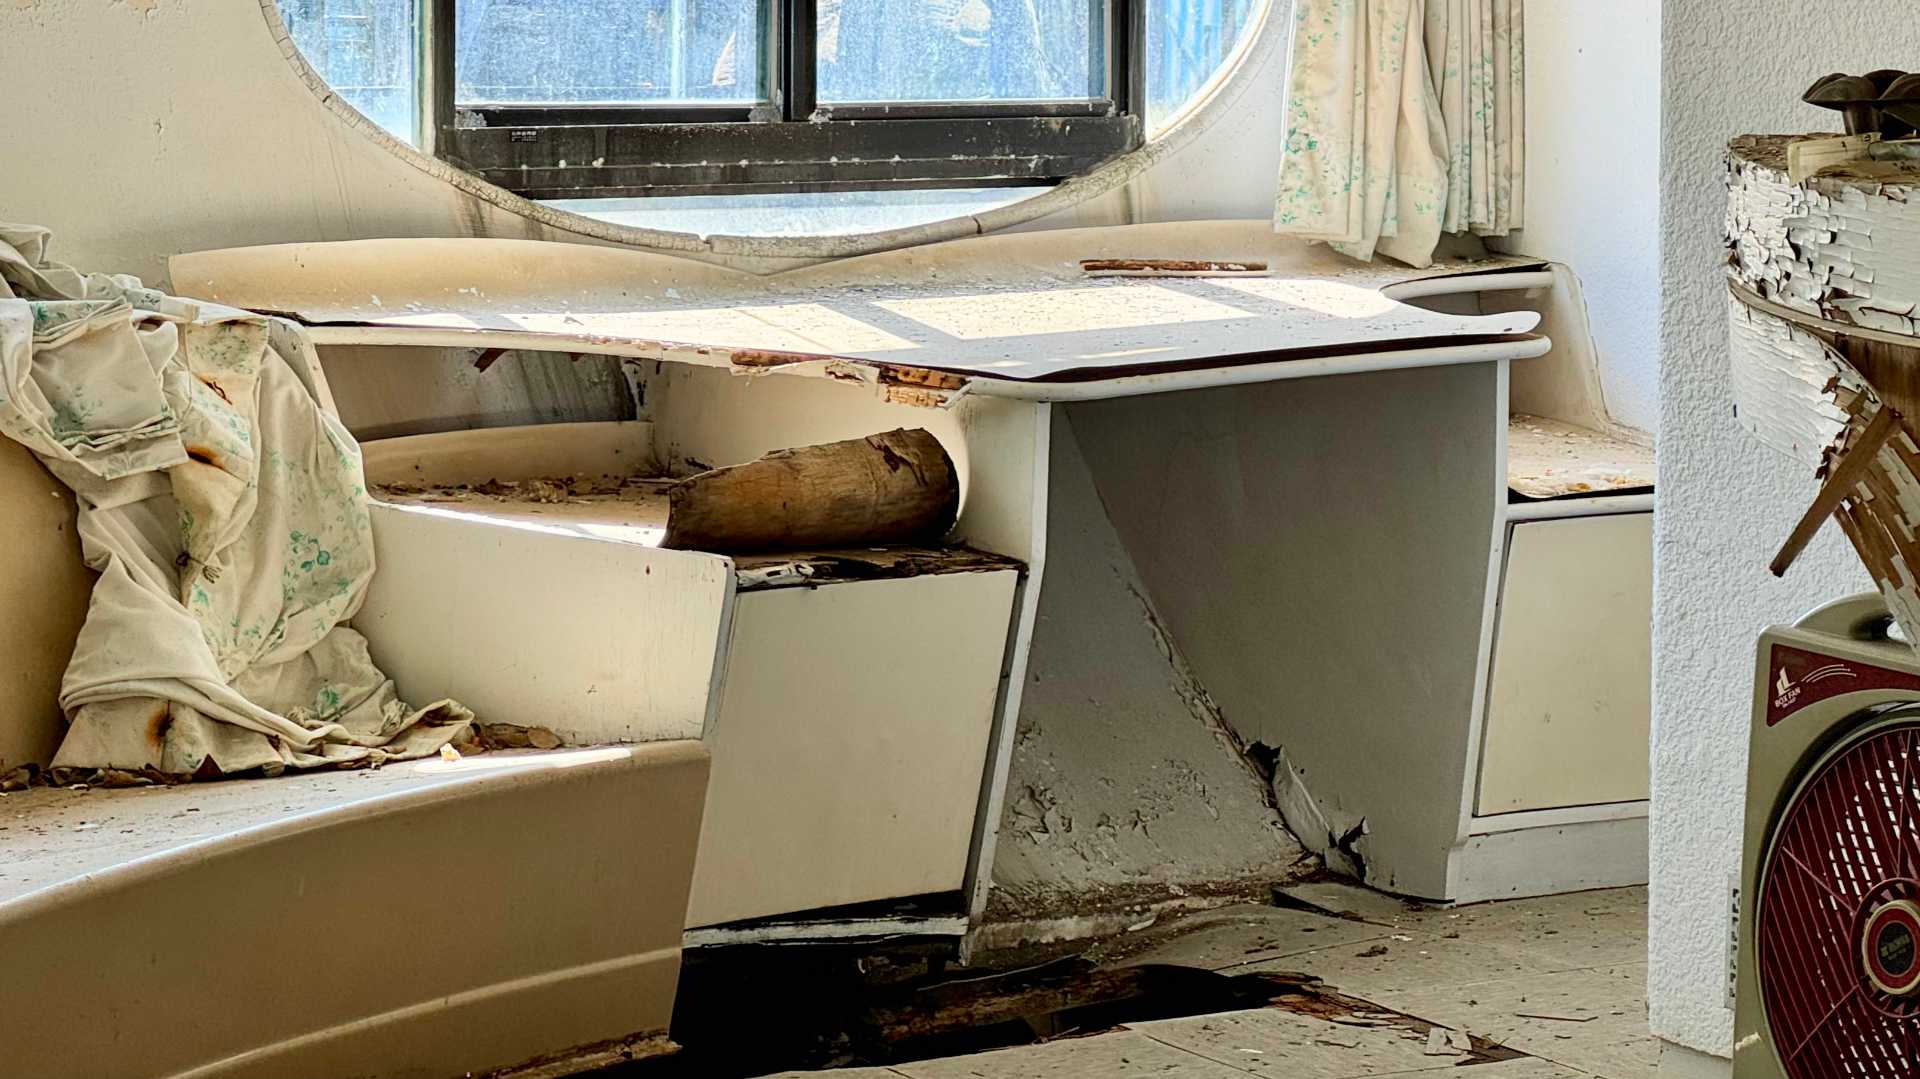 Rotting inbuilt furniture above a hole in the floor. Soft coverings are missing.